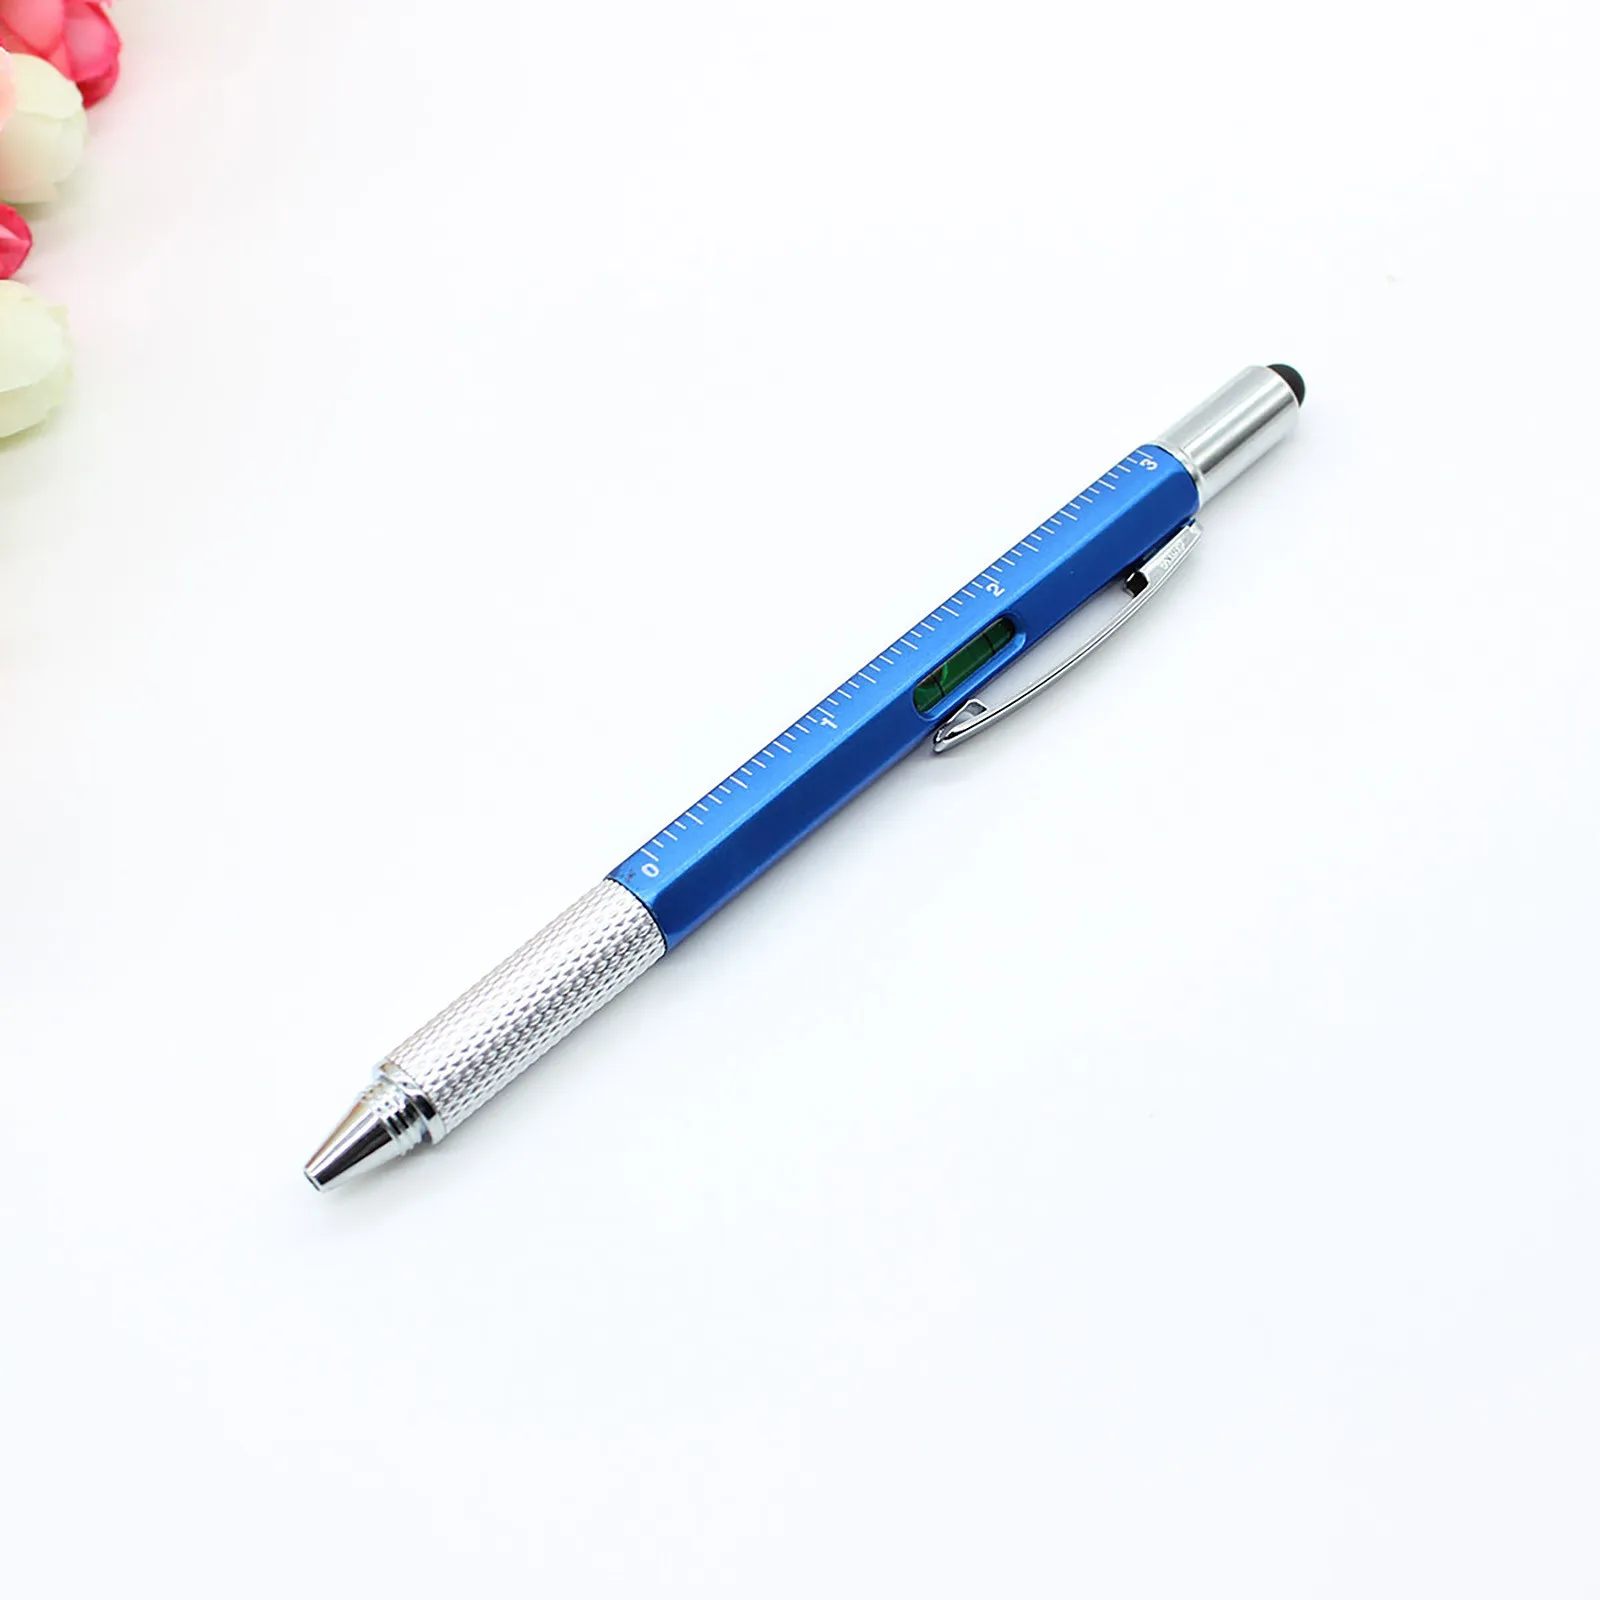 6 in 1 Multi-tools Pens Multifunction Ball-point Pen Caliper D8A2 Y6F2 X1R2 